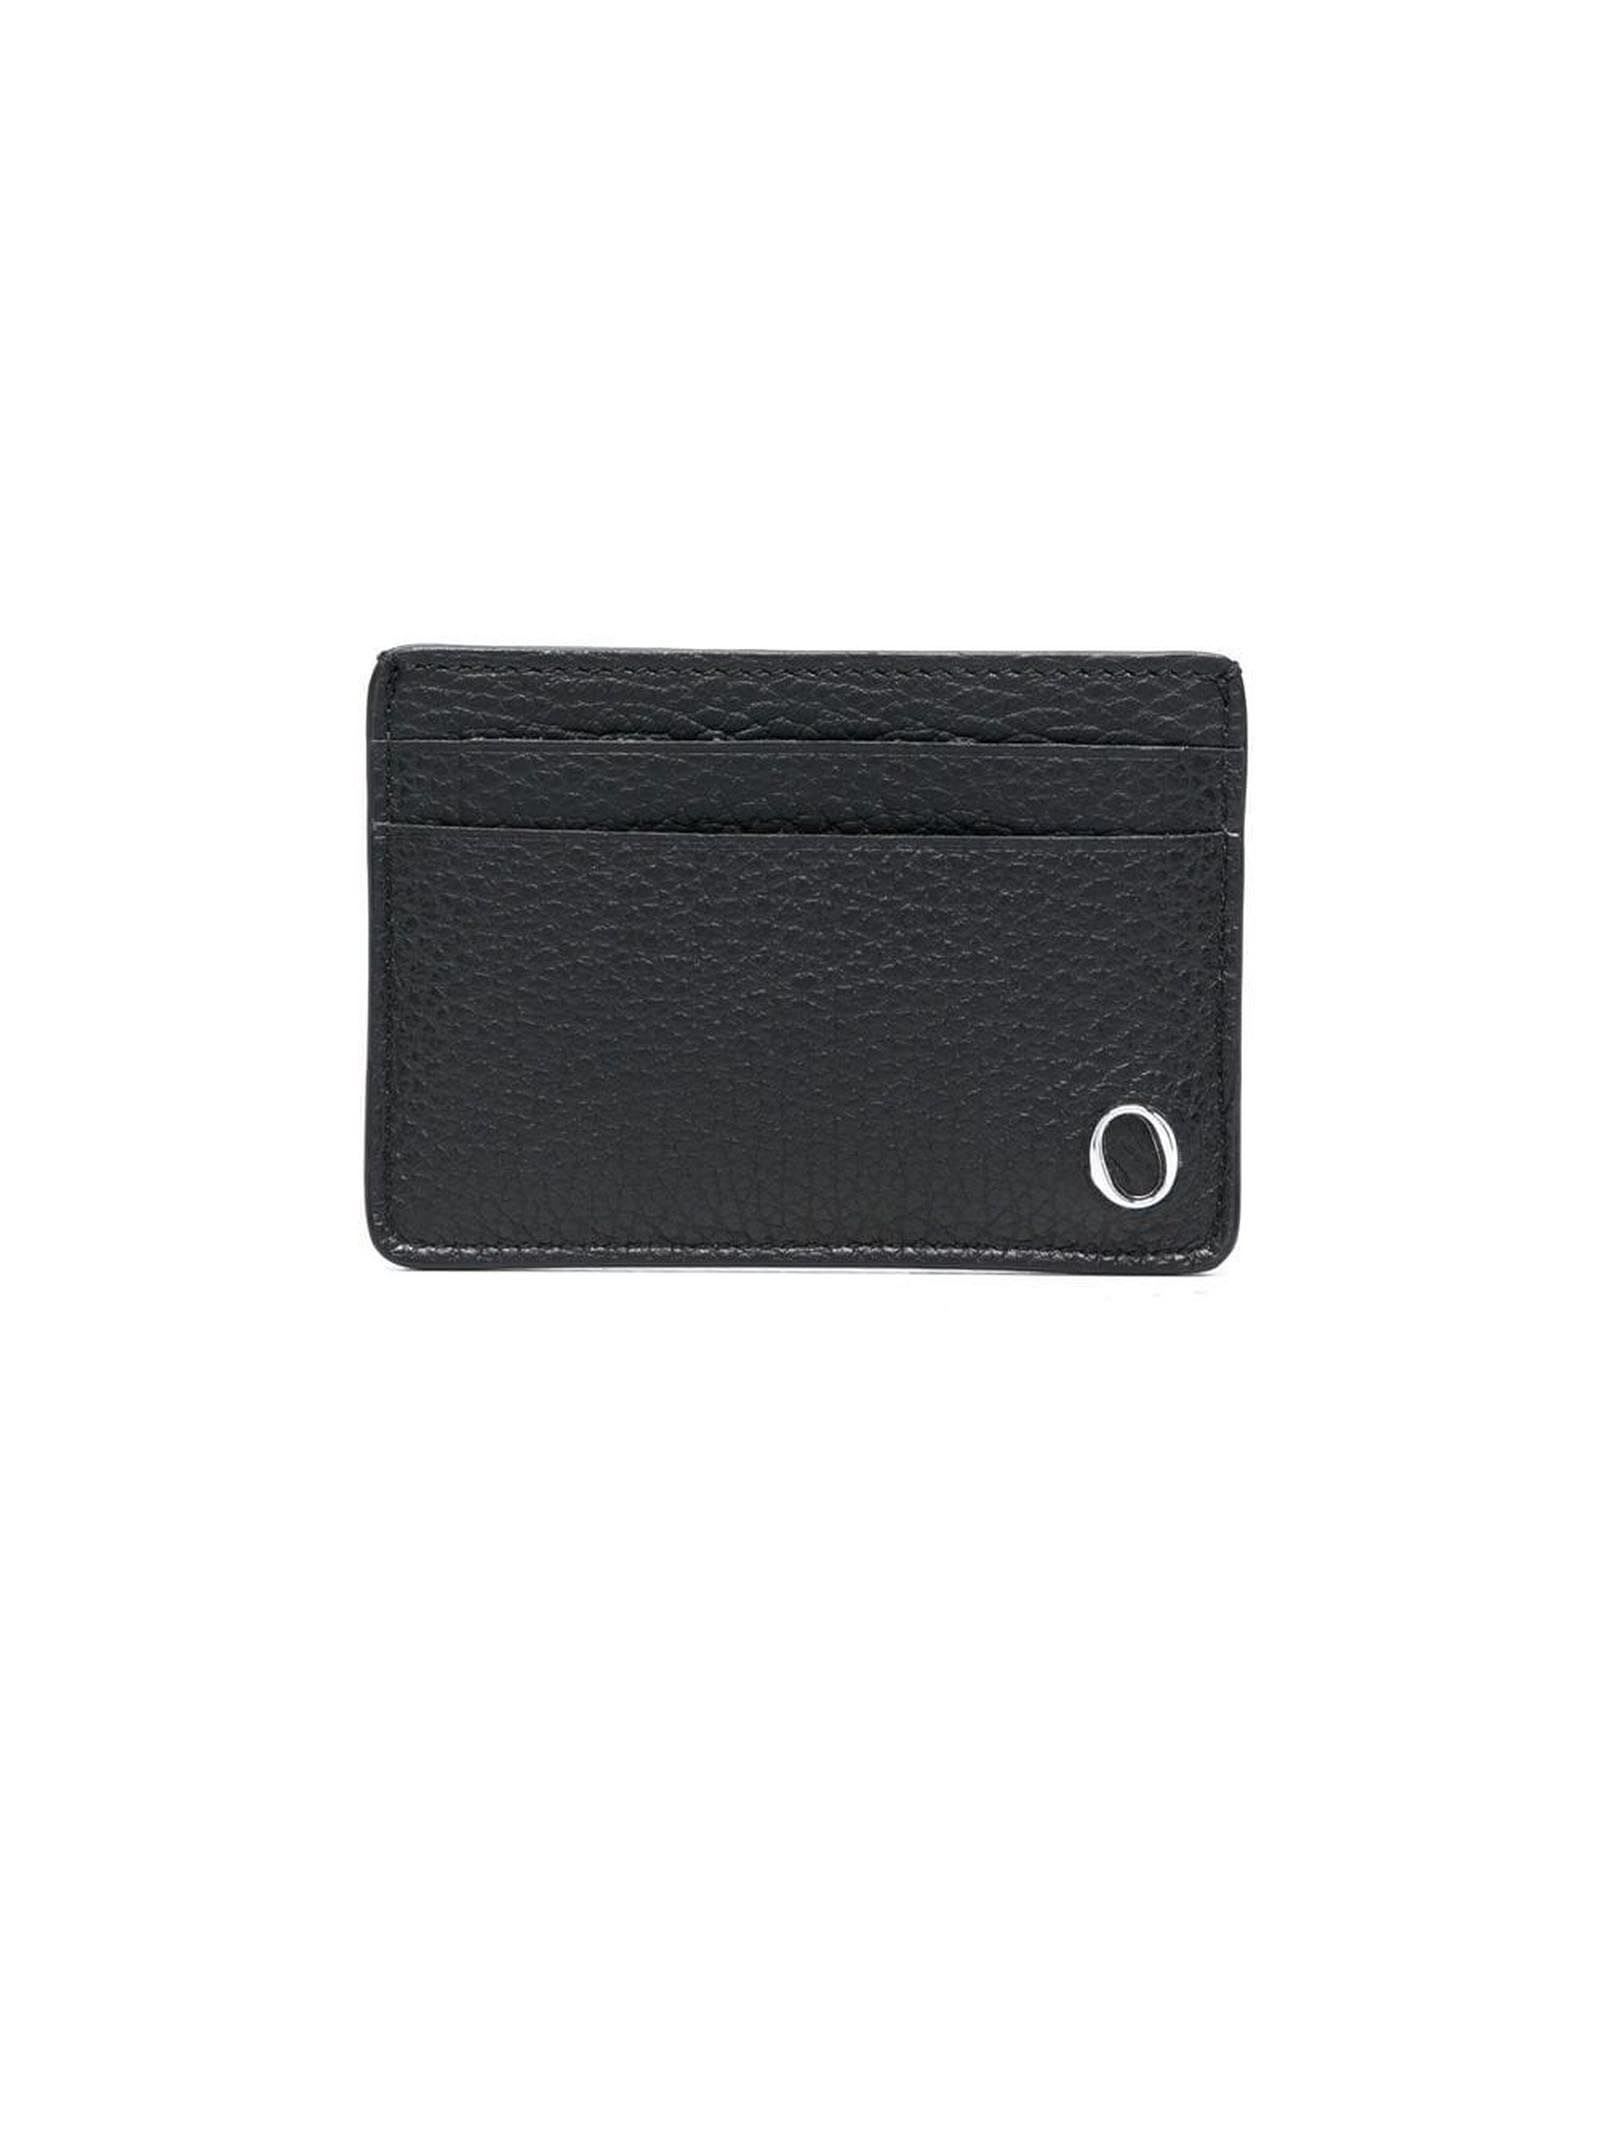 Orciani Micron Leather Card Holder In Black